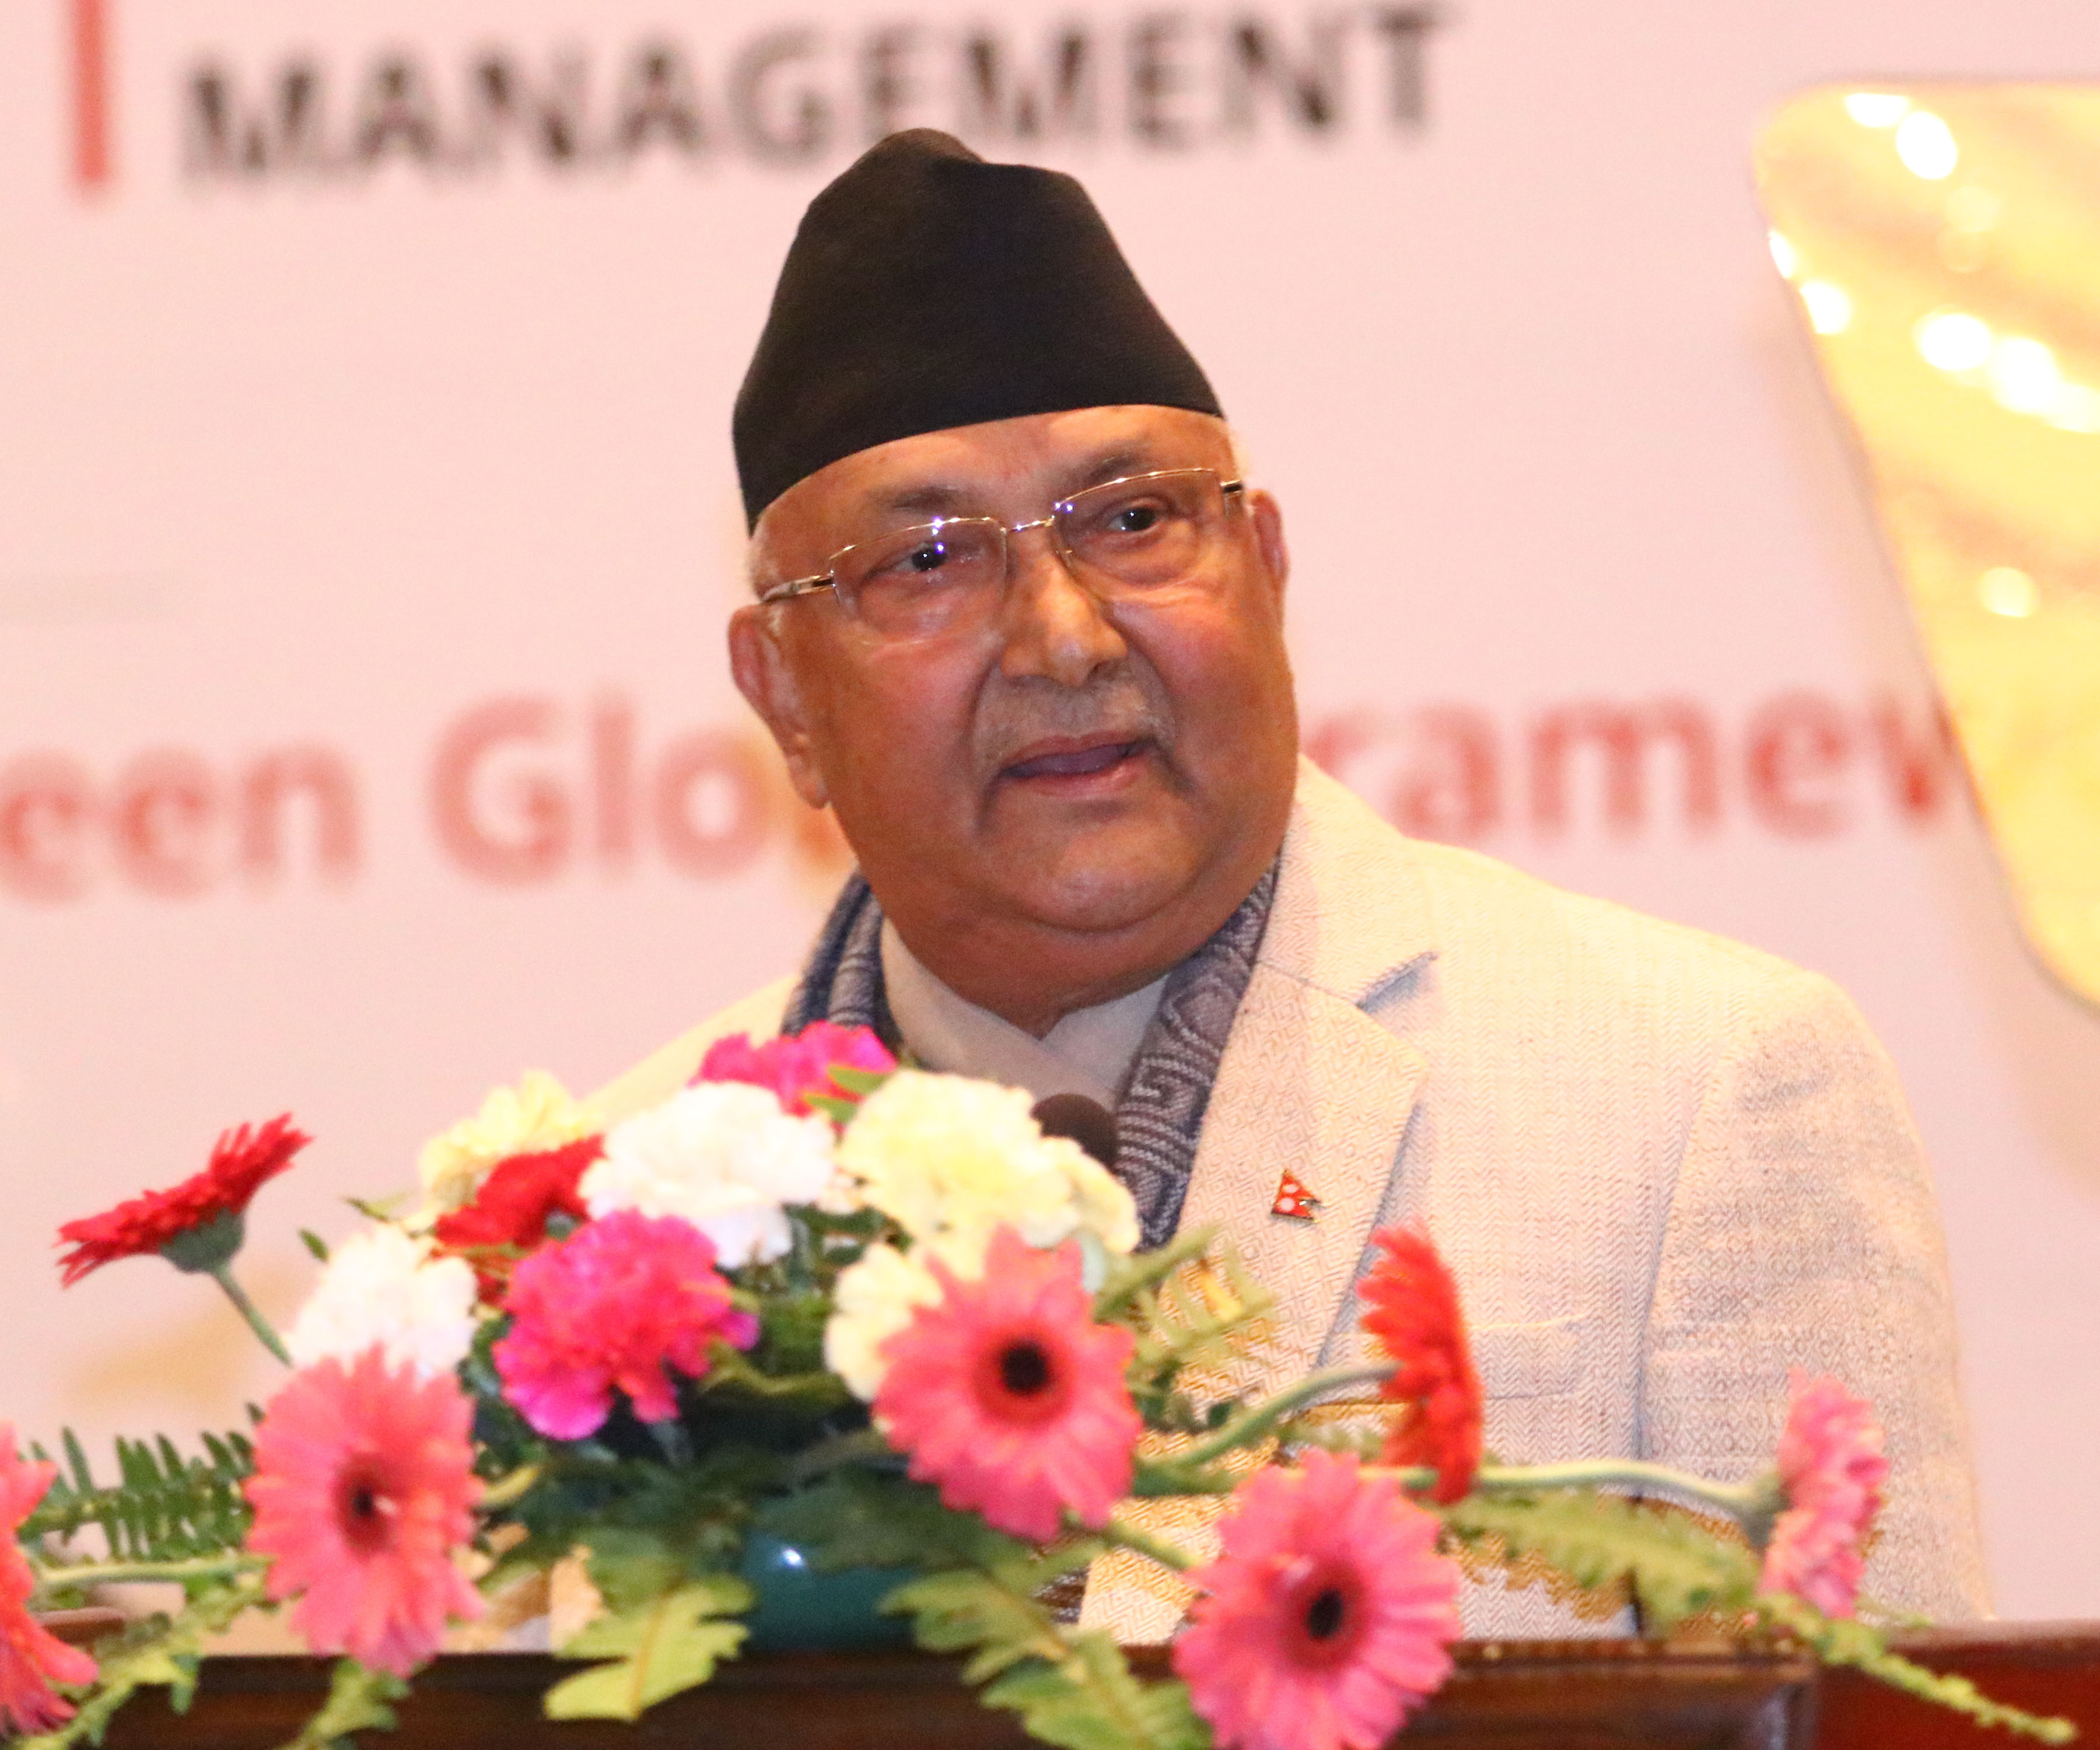 Govt is serious about disaster risk management: PM Oli